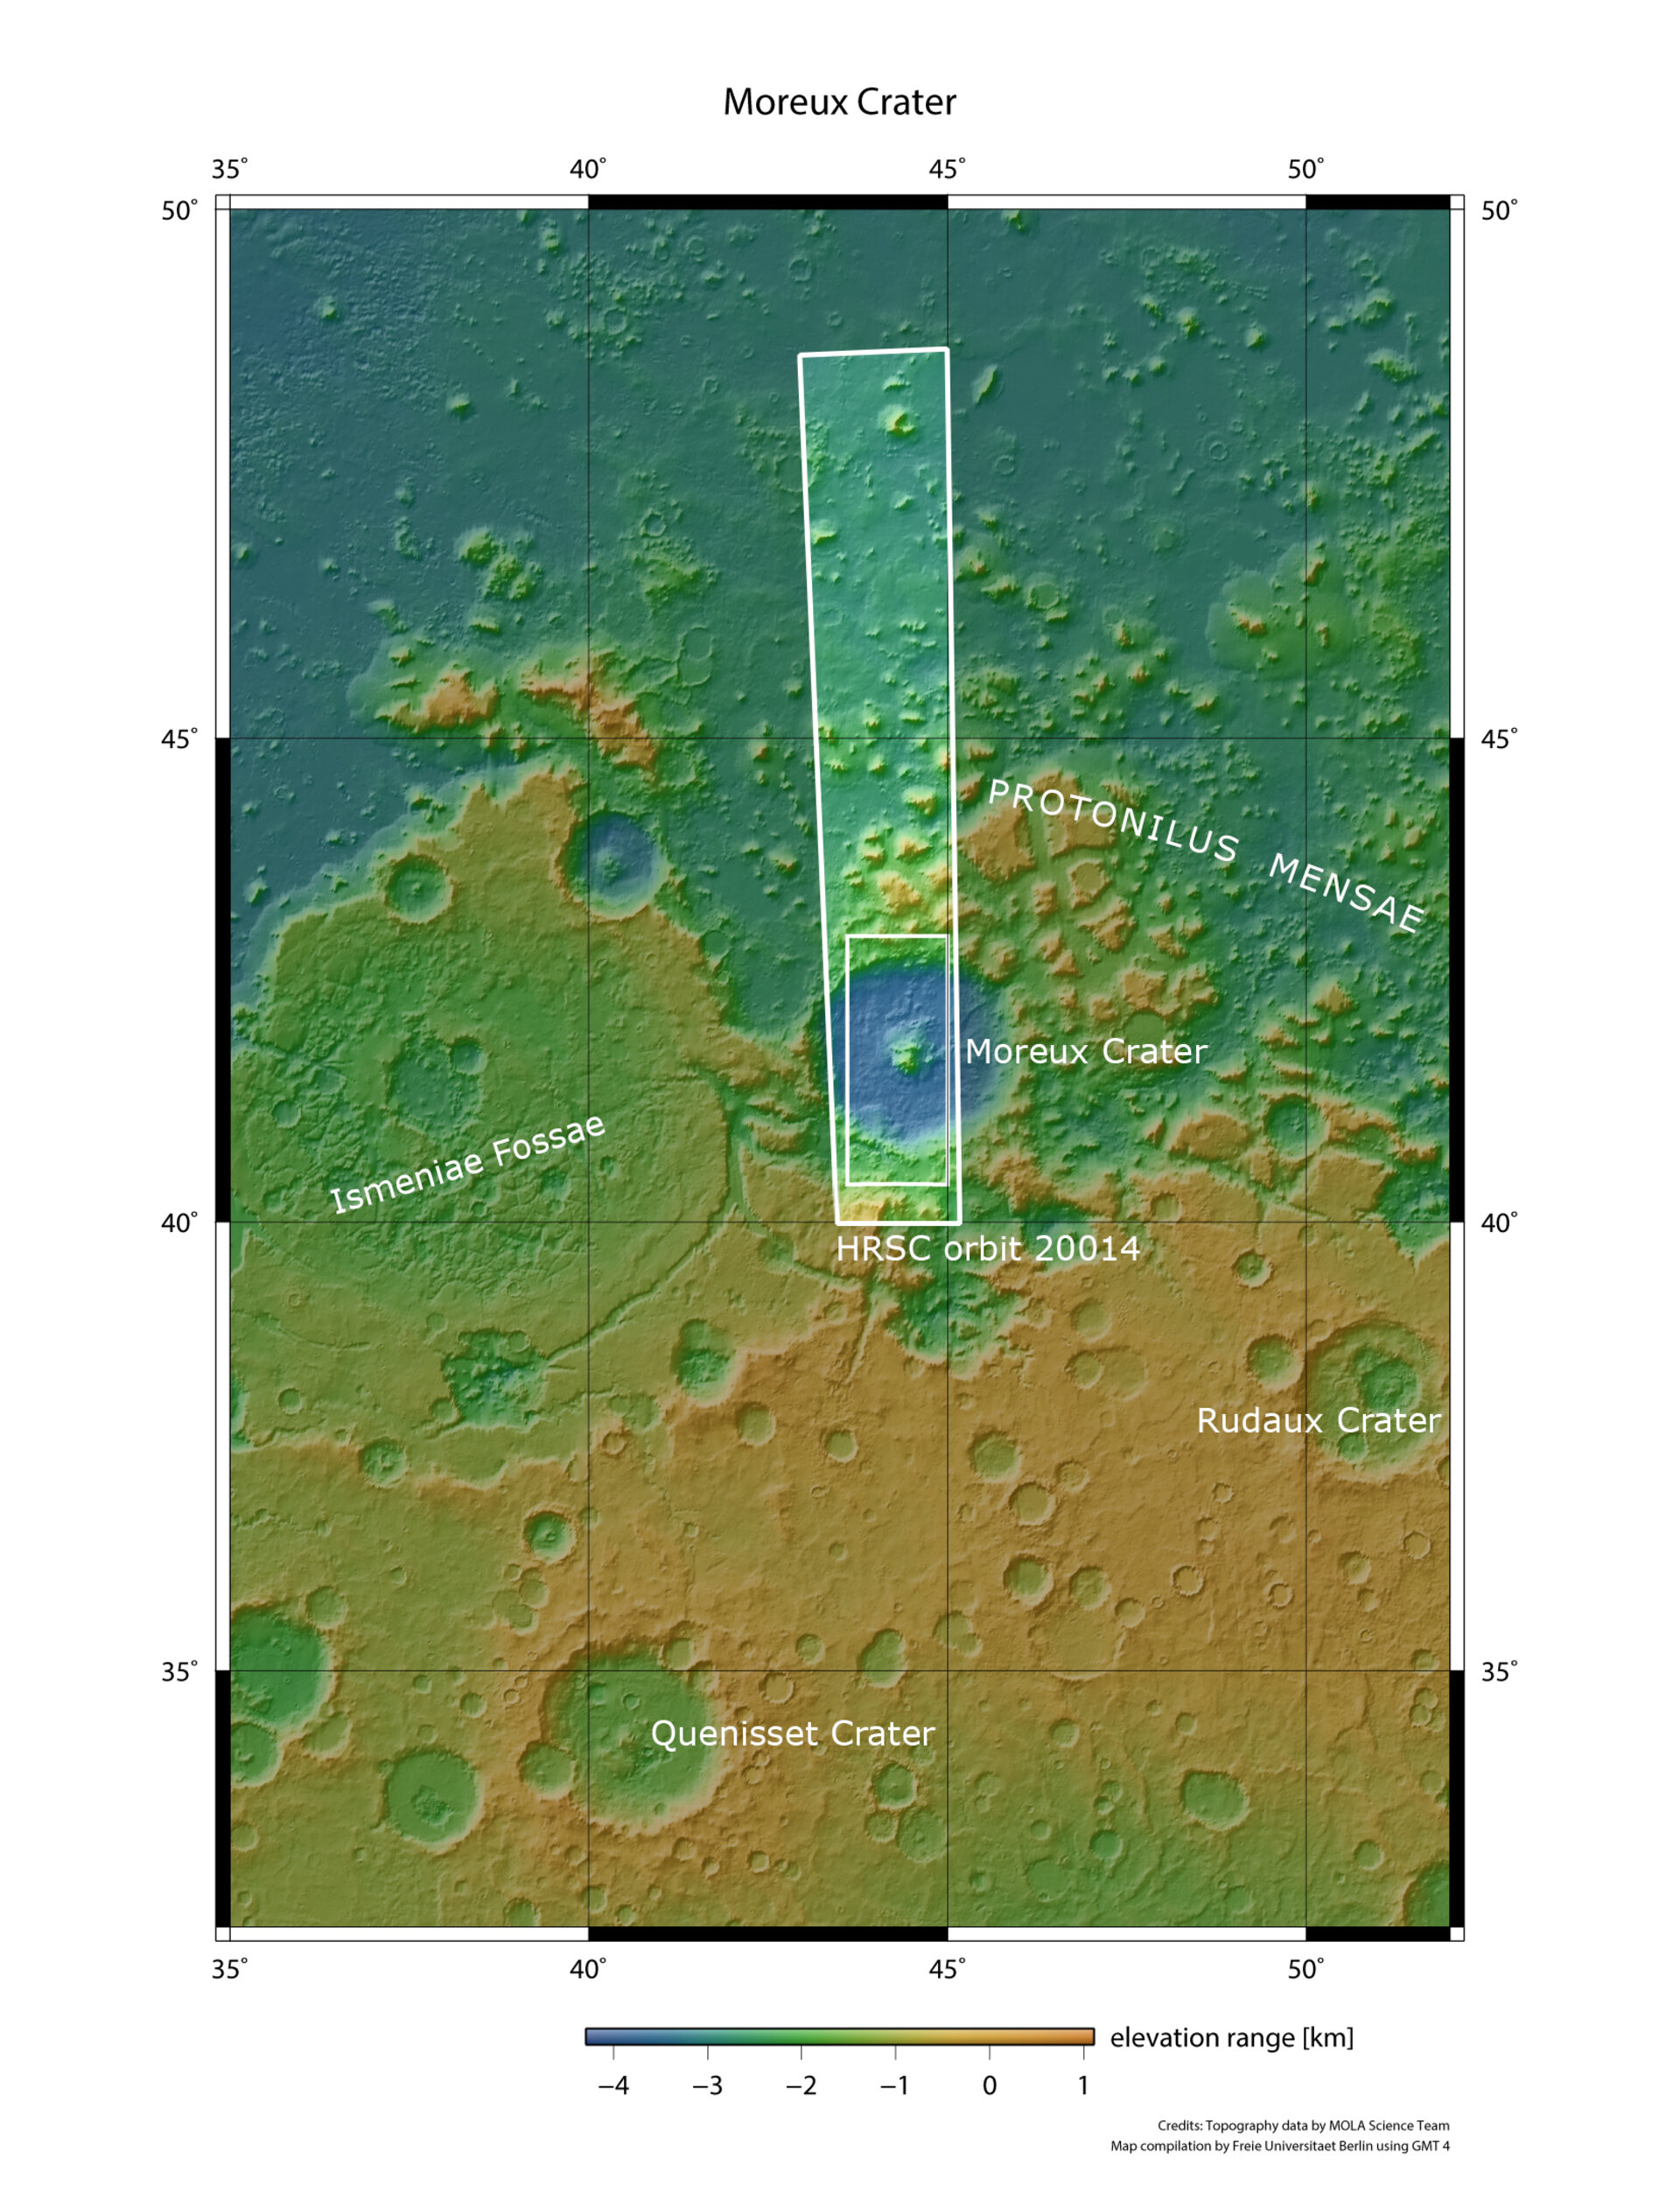 Moreux crater in wider context